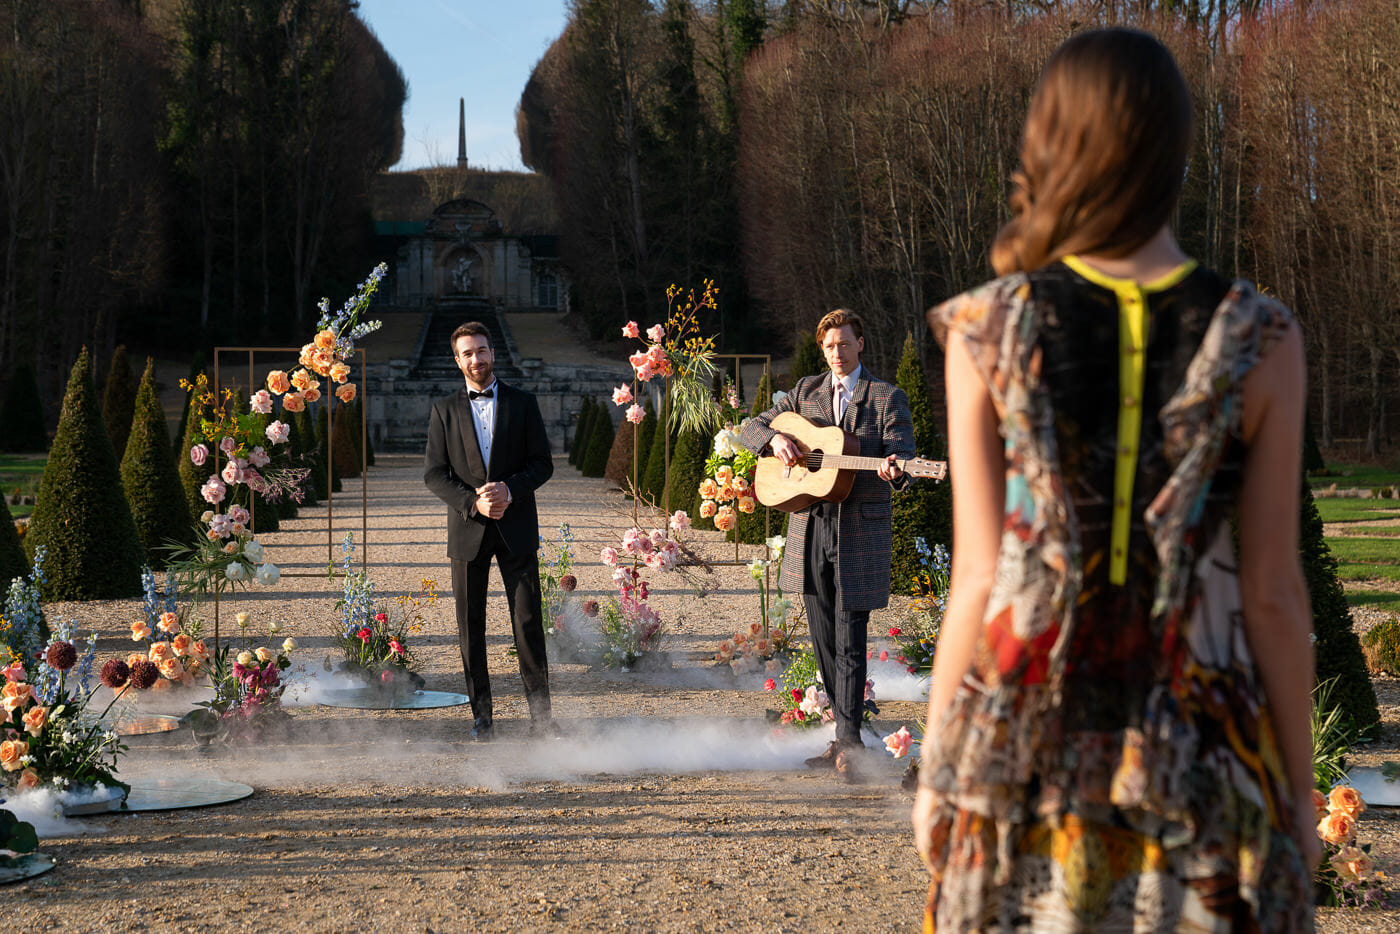 the most beautiful marriage proposal ever at Chateau Villette near Paris